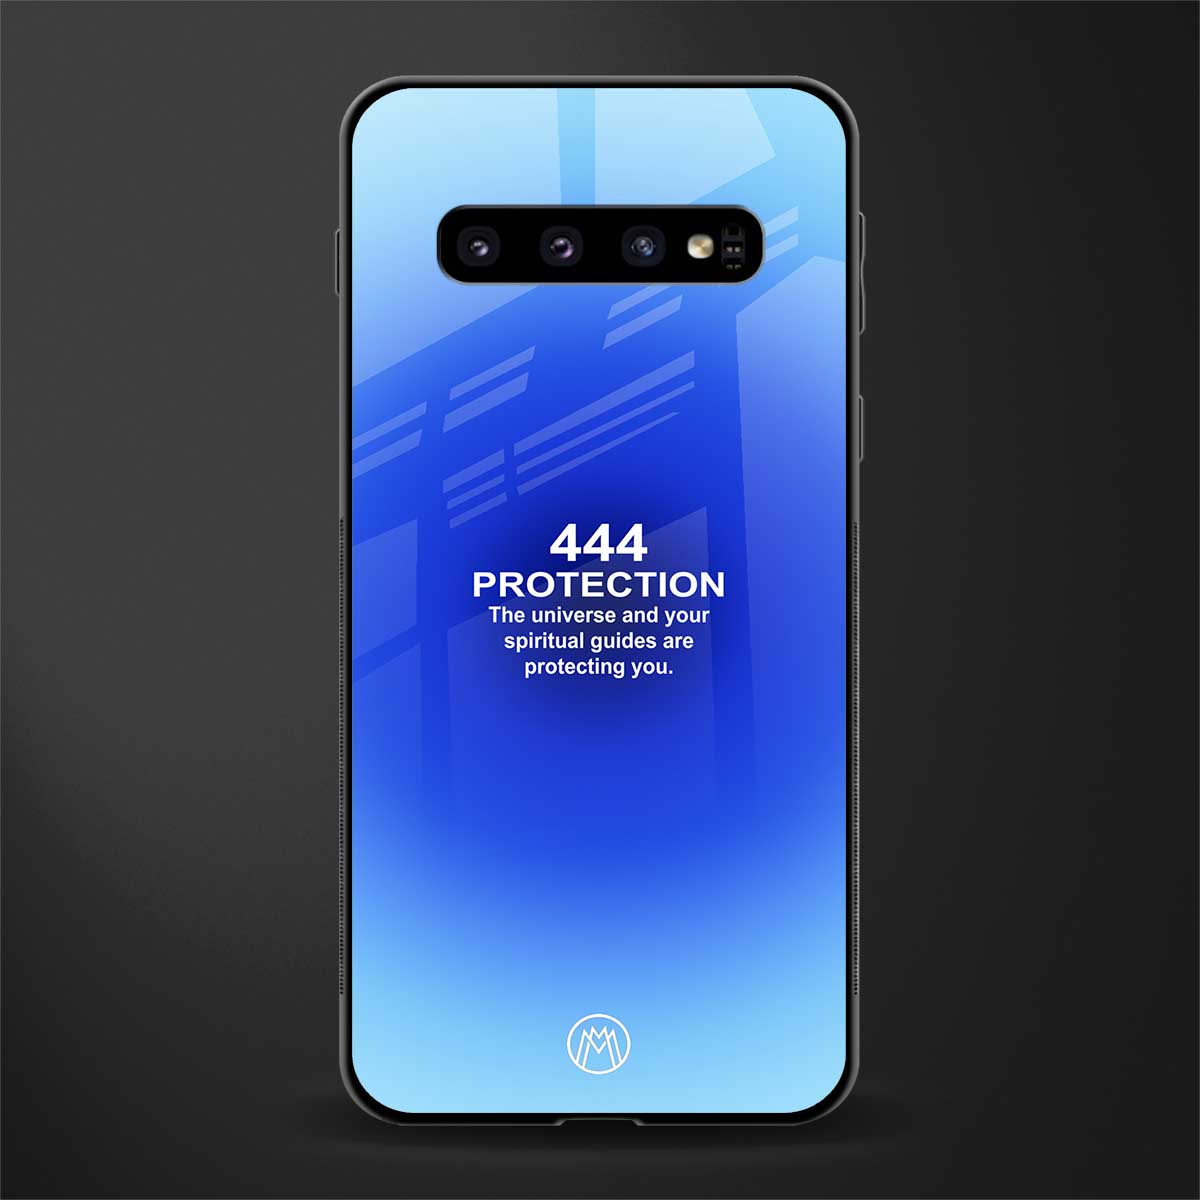 444 protection glass case for samsung galaxy s10 plus image